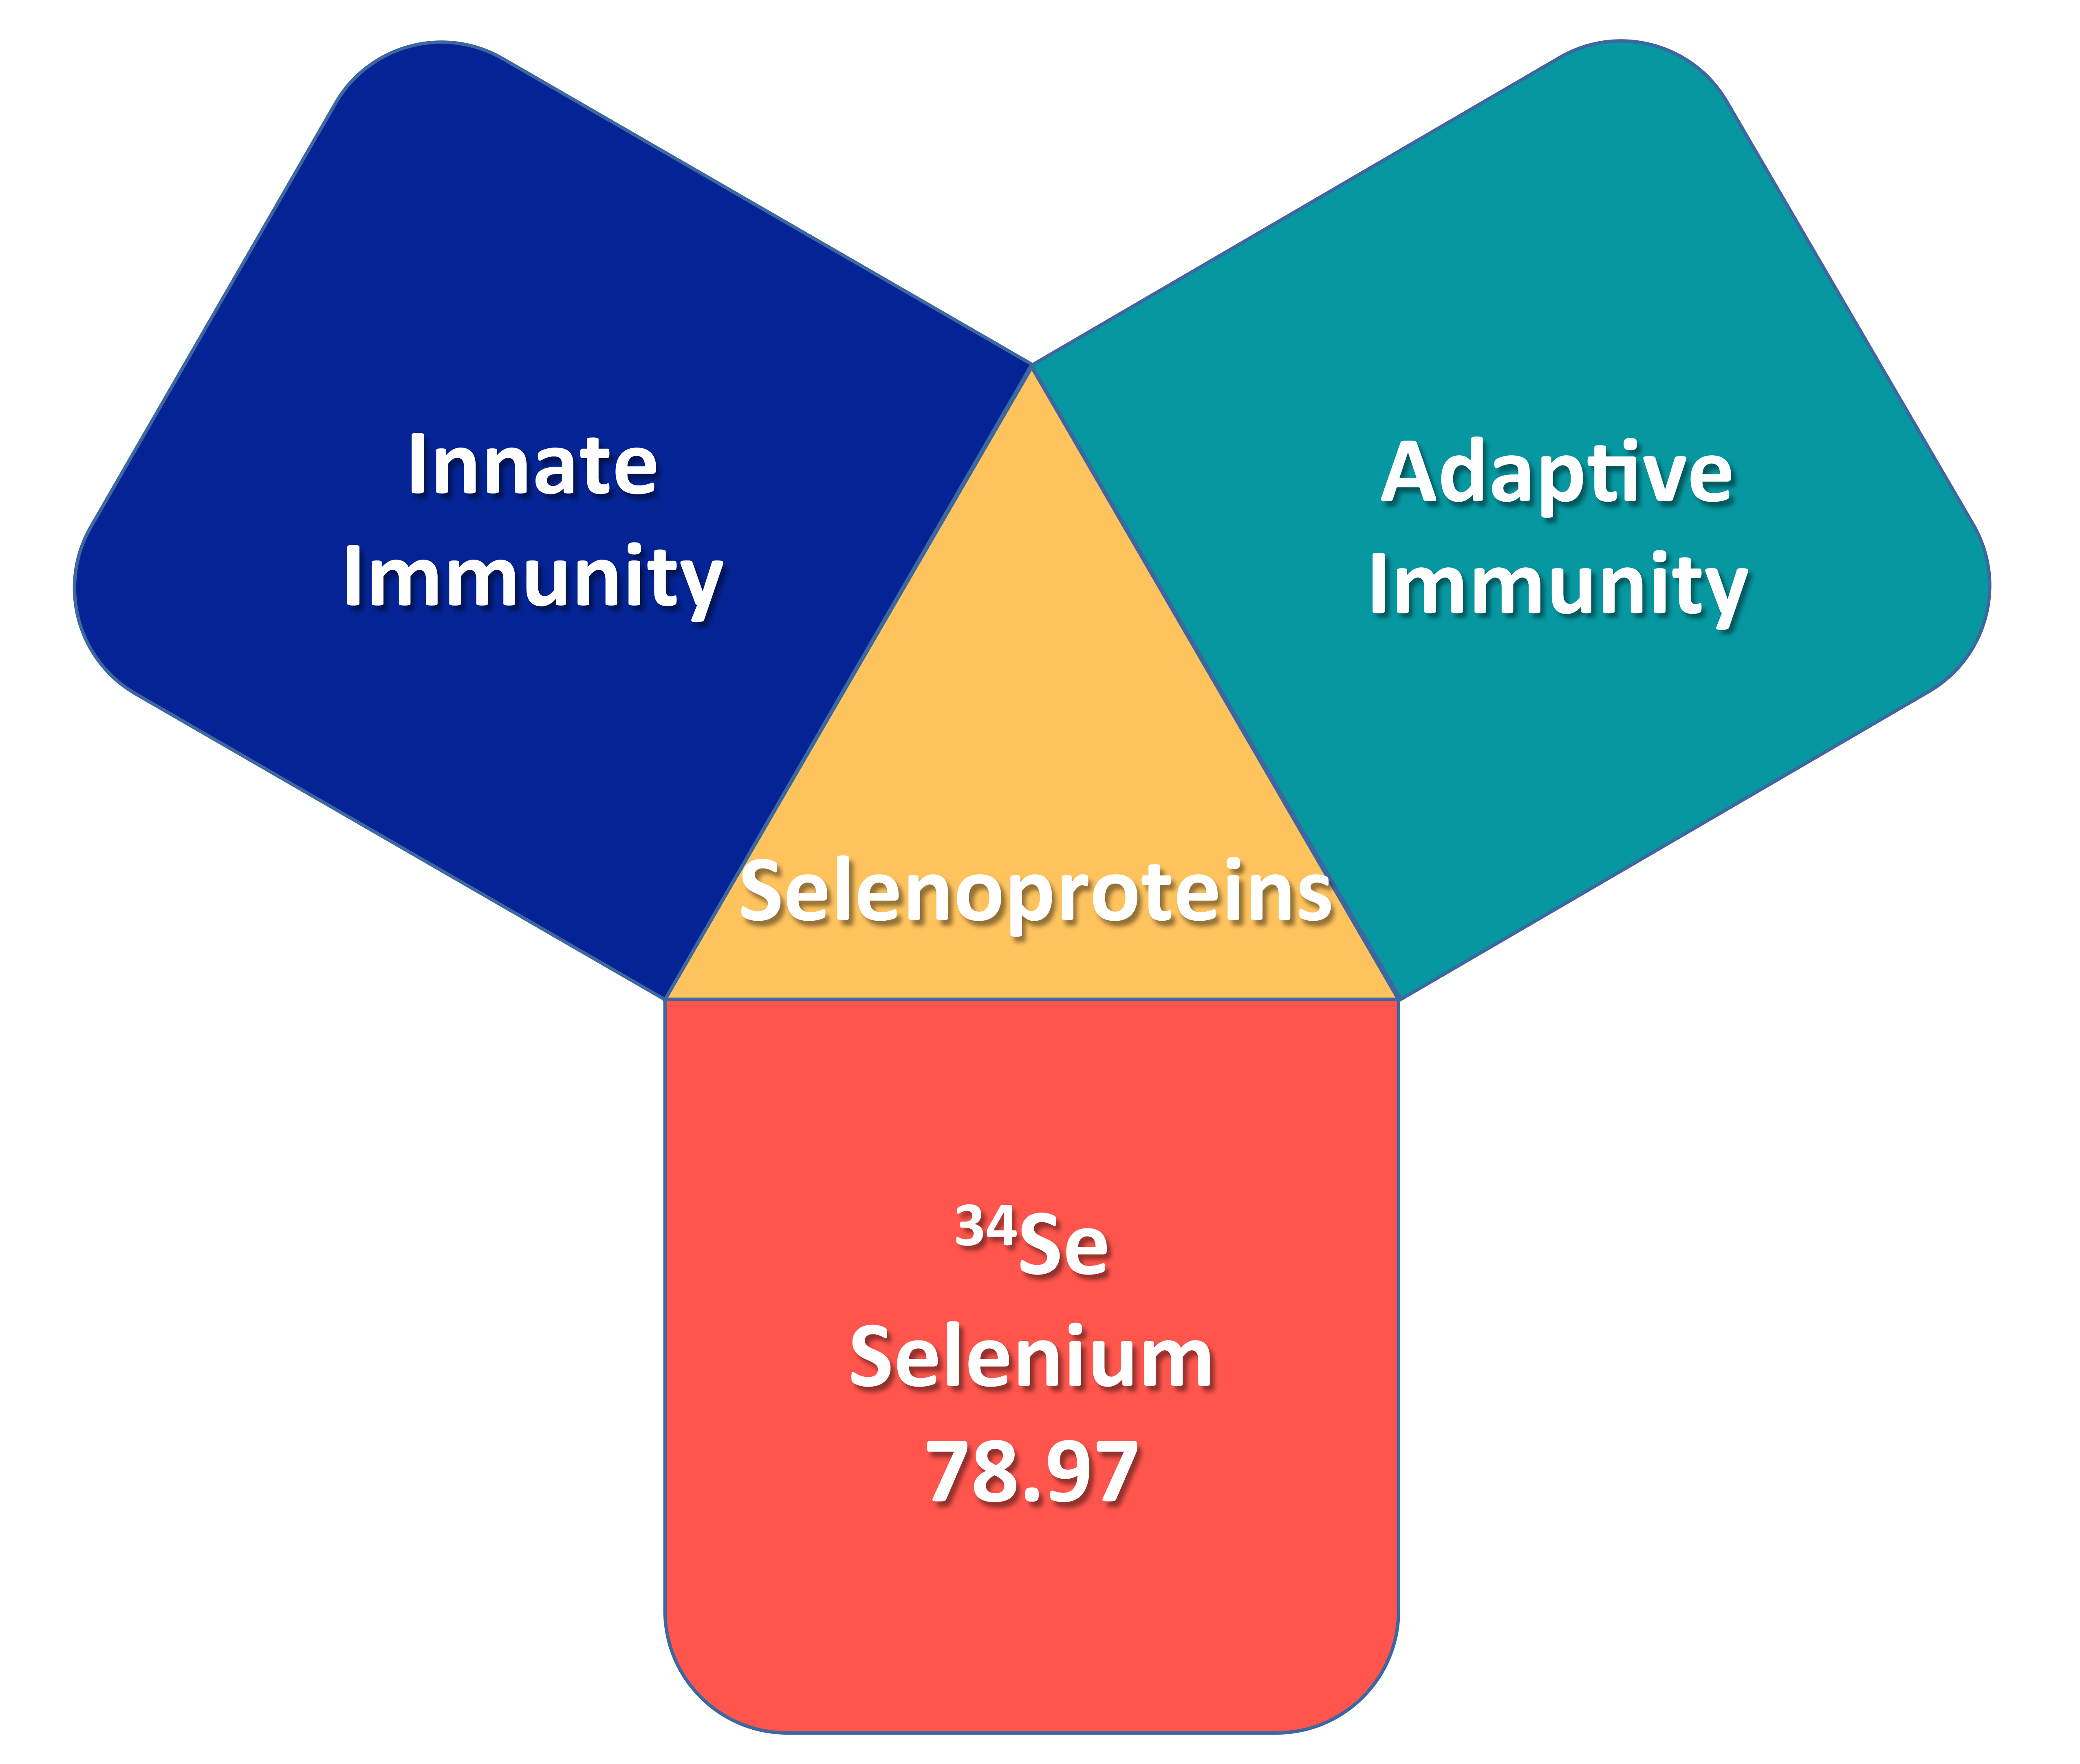 Nutrients | Free Full-Text | Selenium, Selenoproteins, and Immunity | HTML